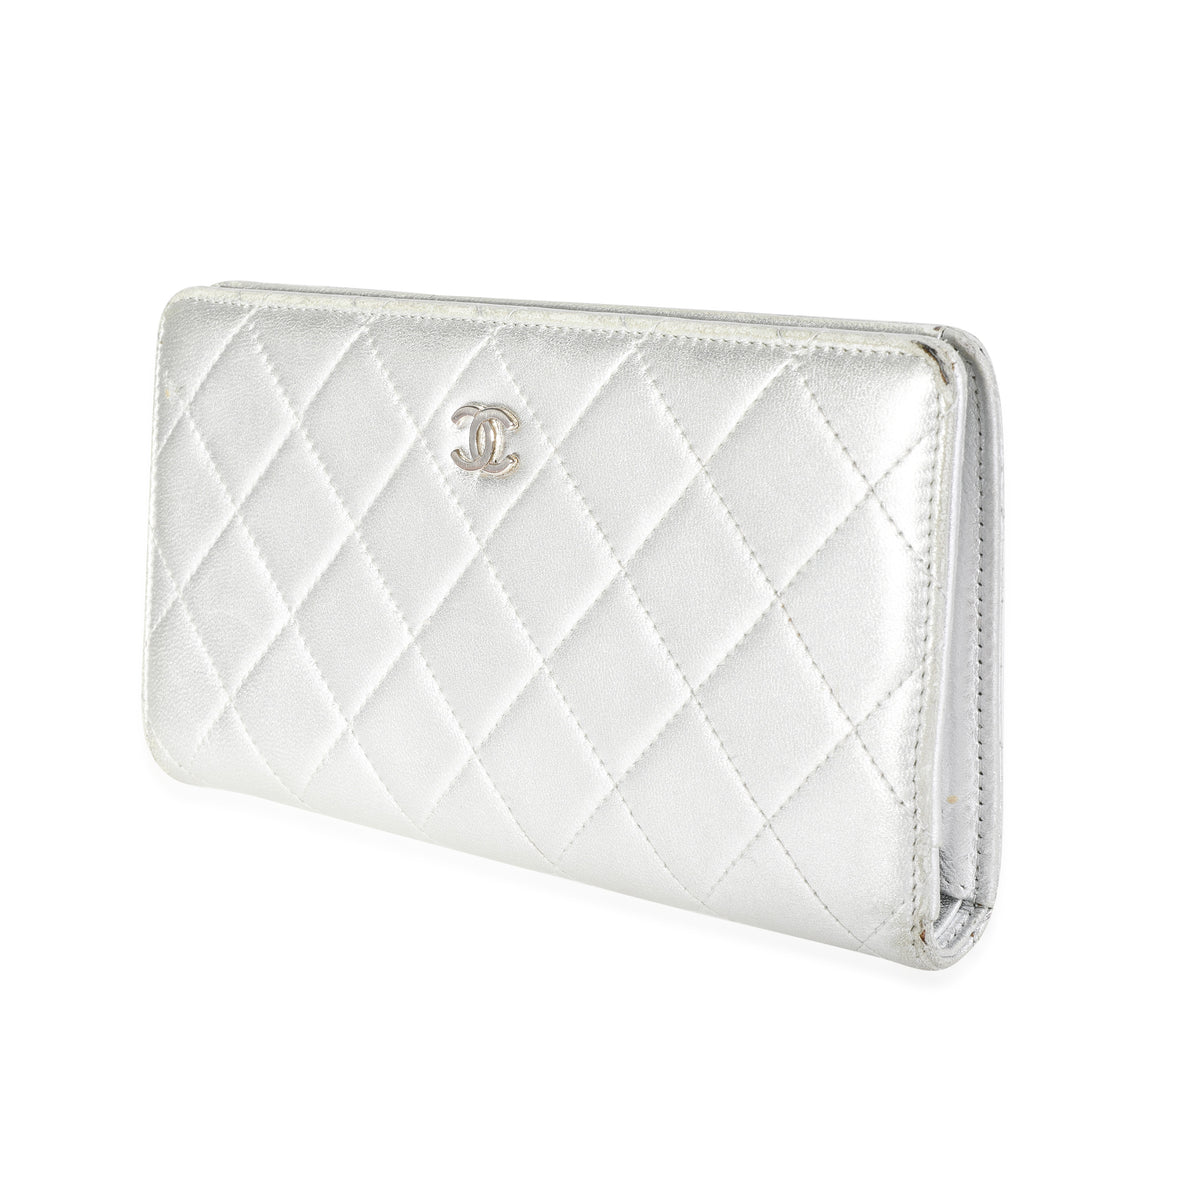 Chanel Metallic Silver Quilted Lambskin Leather CC L-Yen Wallet